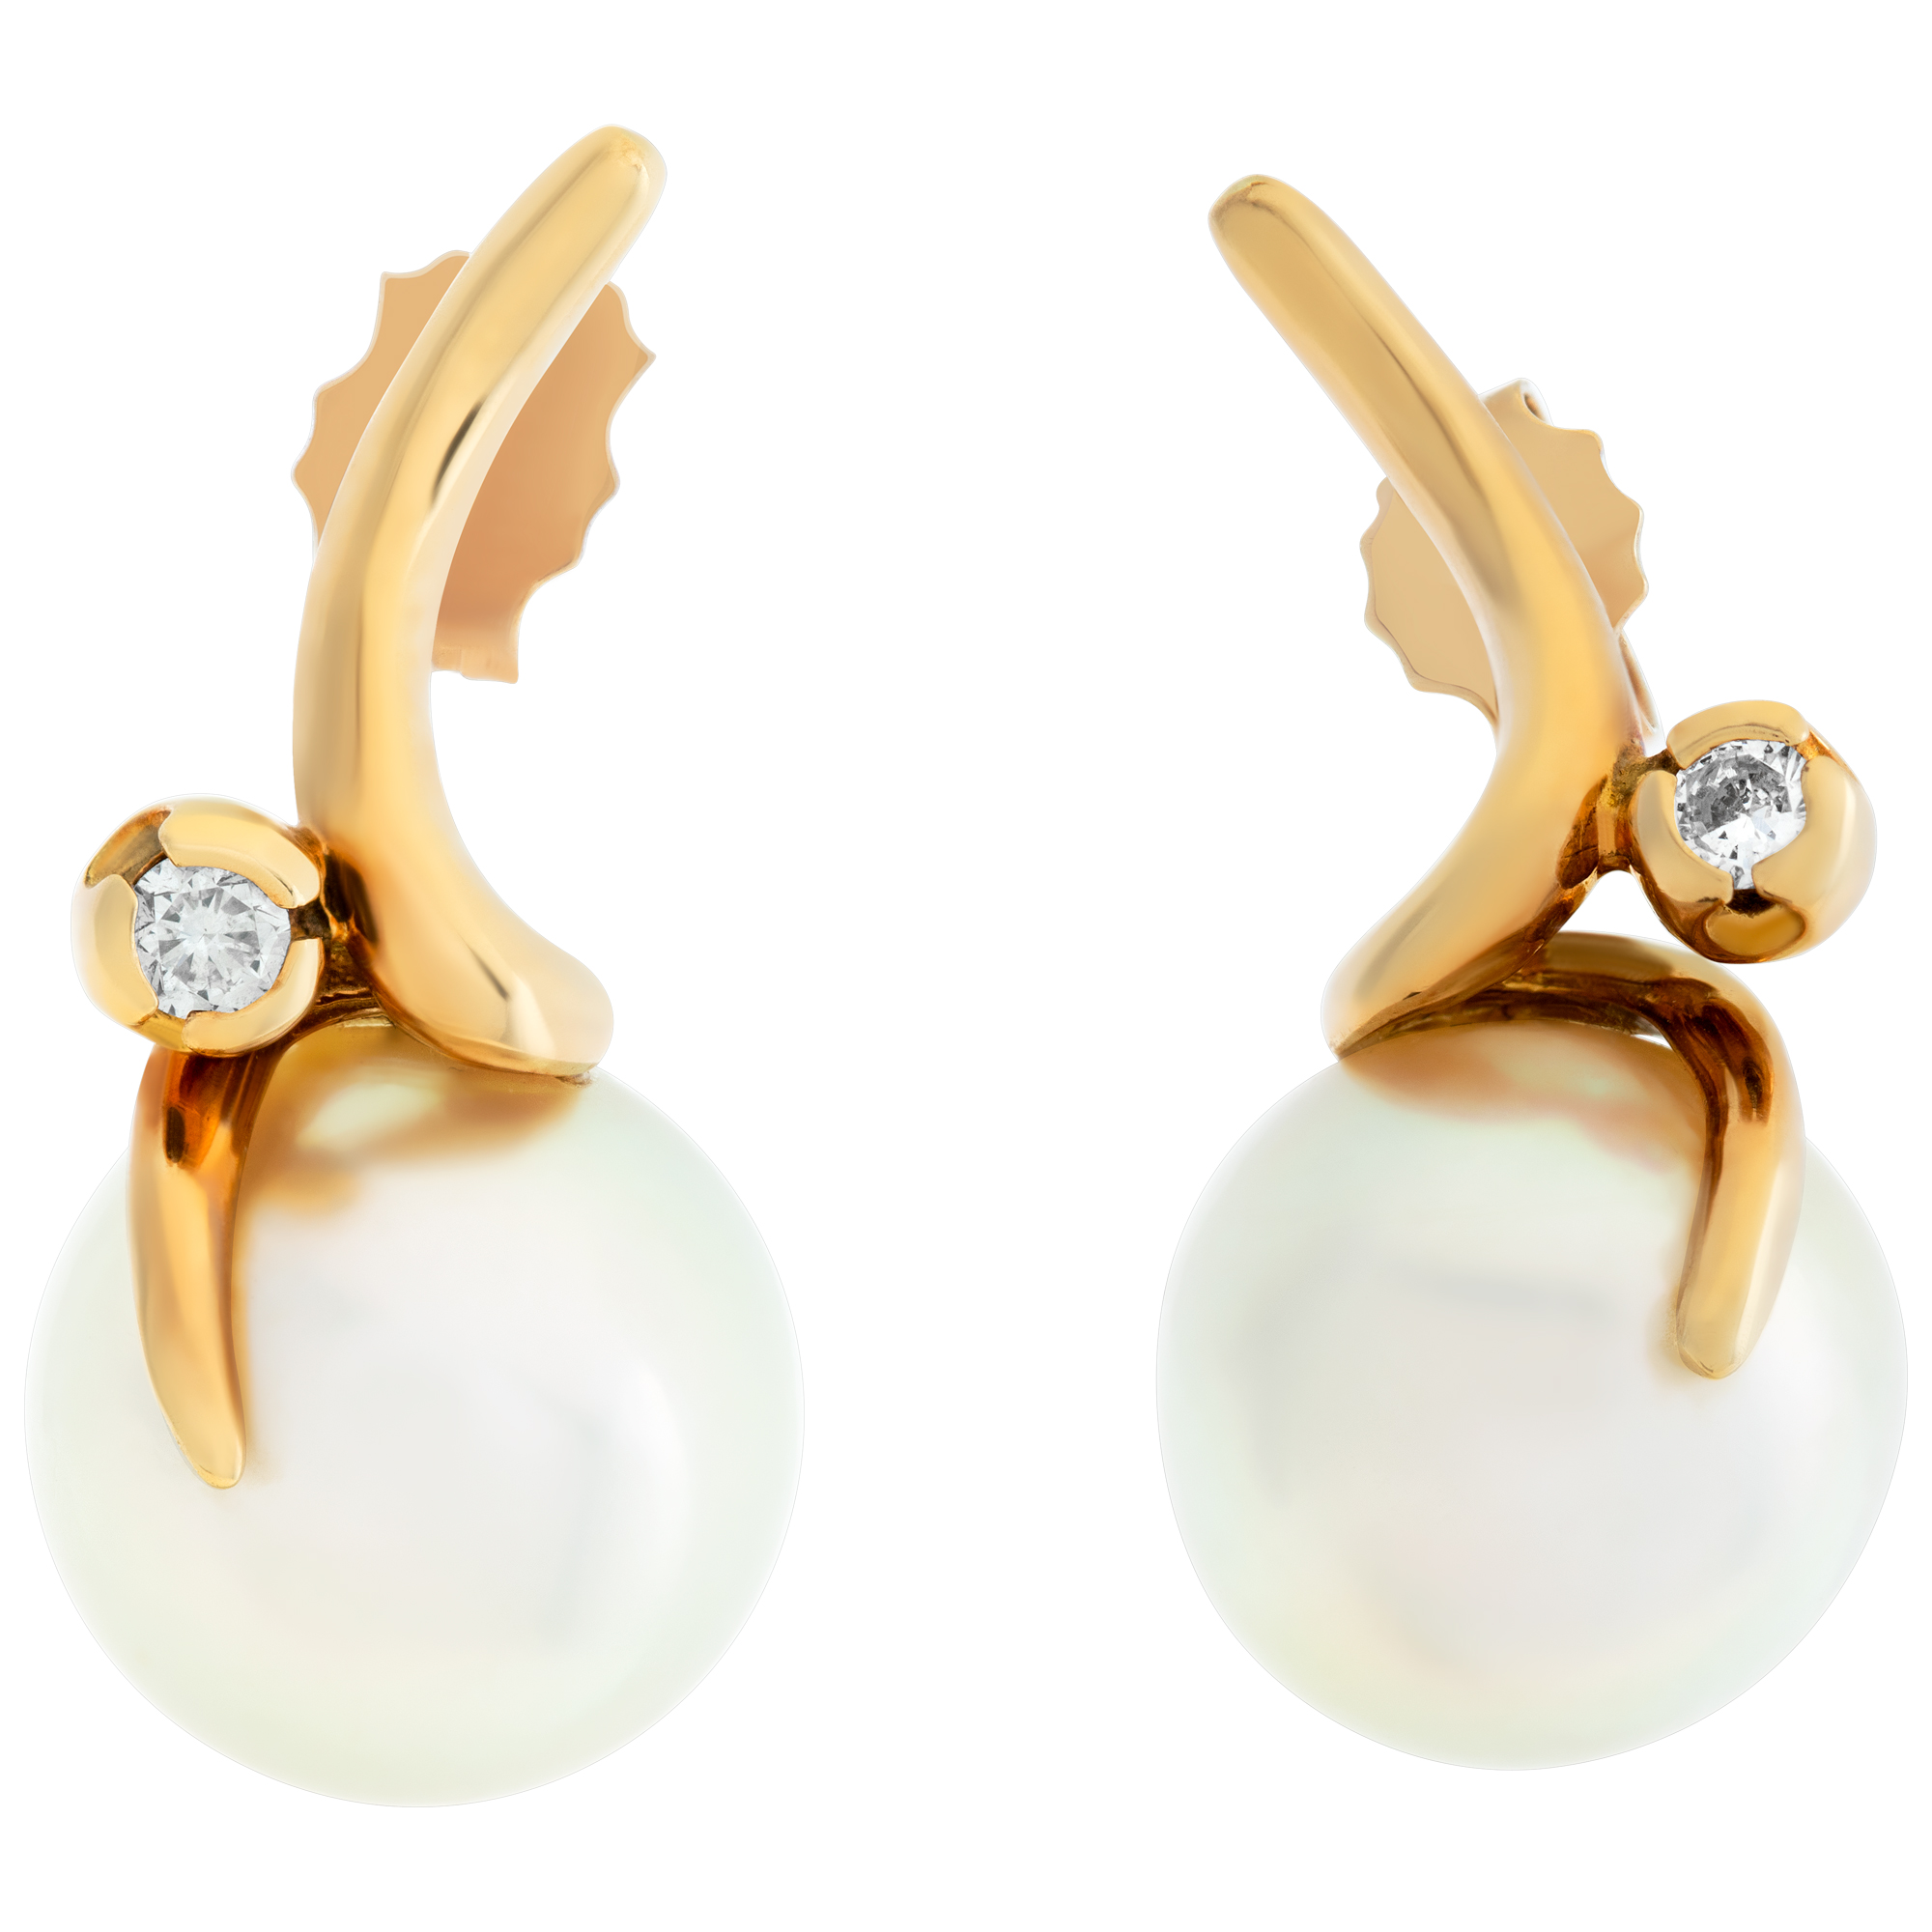 Off round South Sea pearl  (14 x 14.50 mm) & diamonds earrings, set in 18k yellow gold